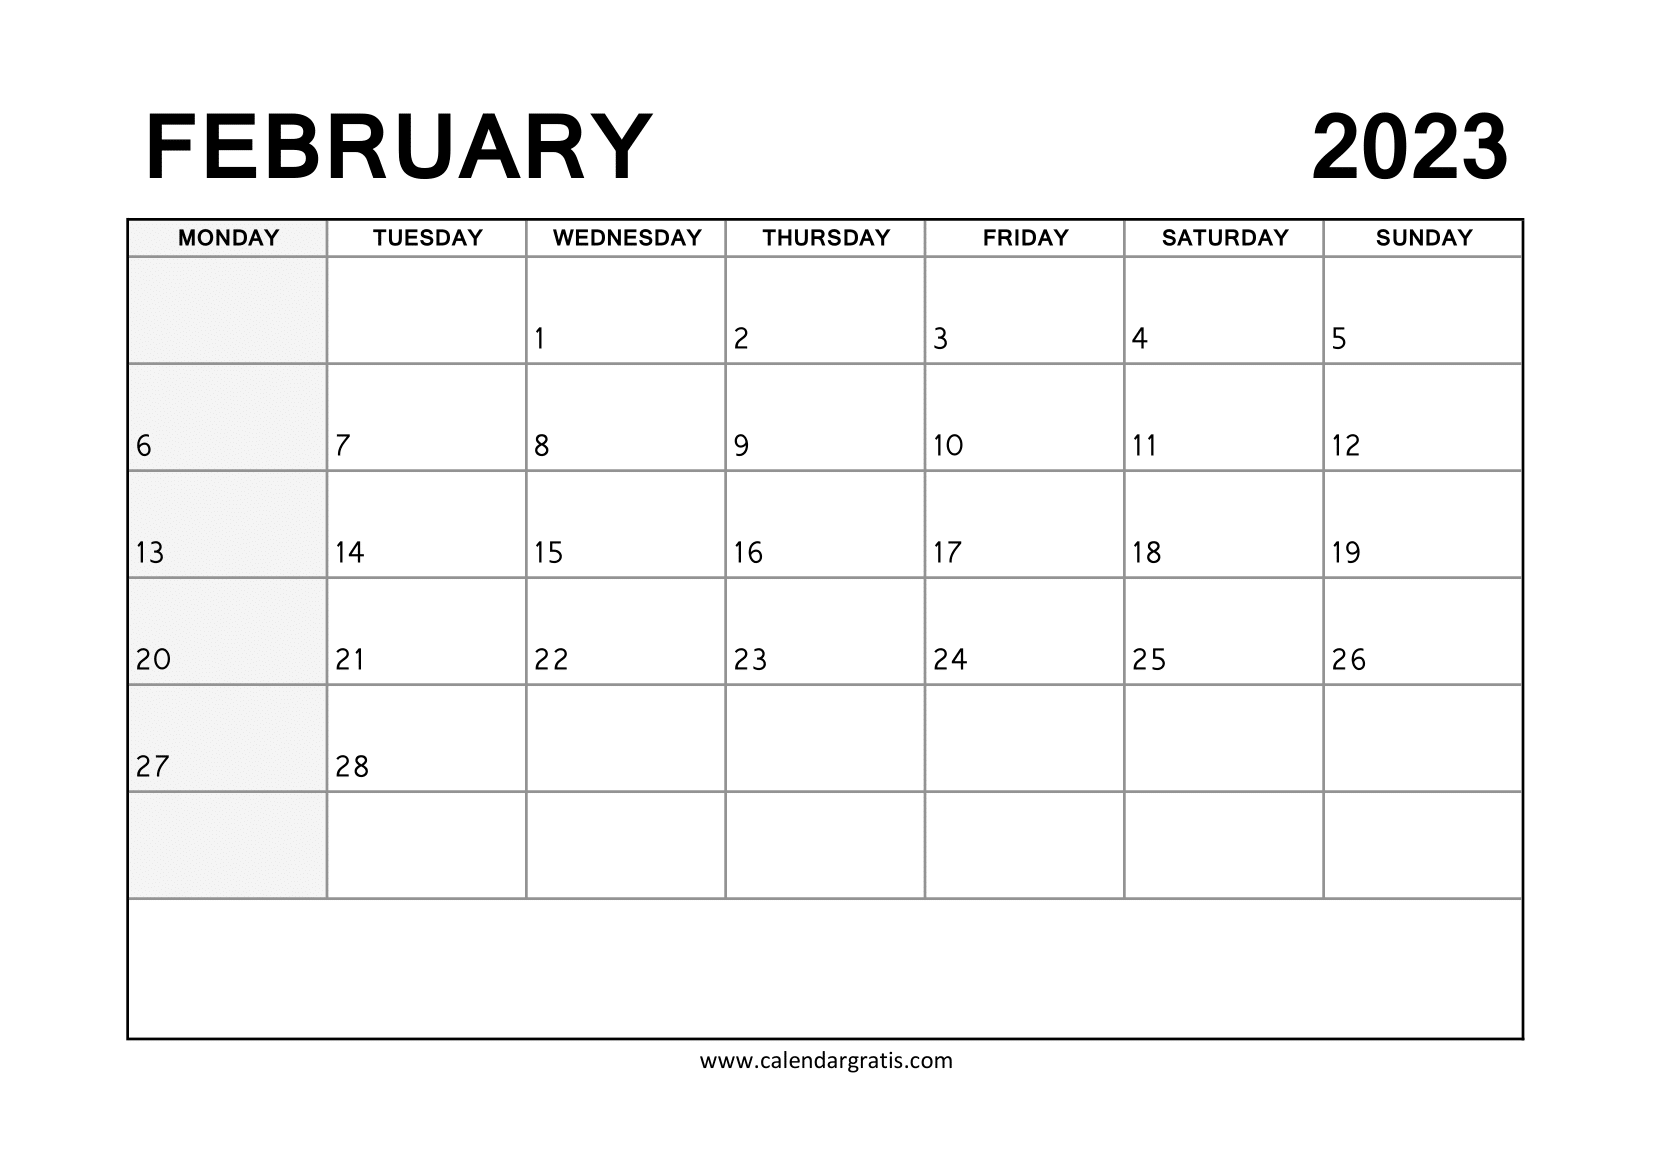 Free Printable February 2023 Calendar Monday to Sunday with Notes and Weekend Highlight.